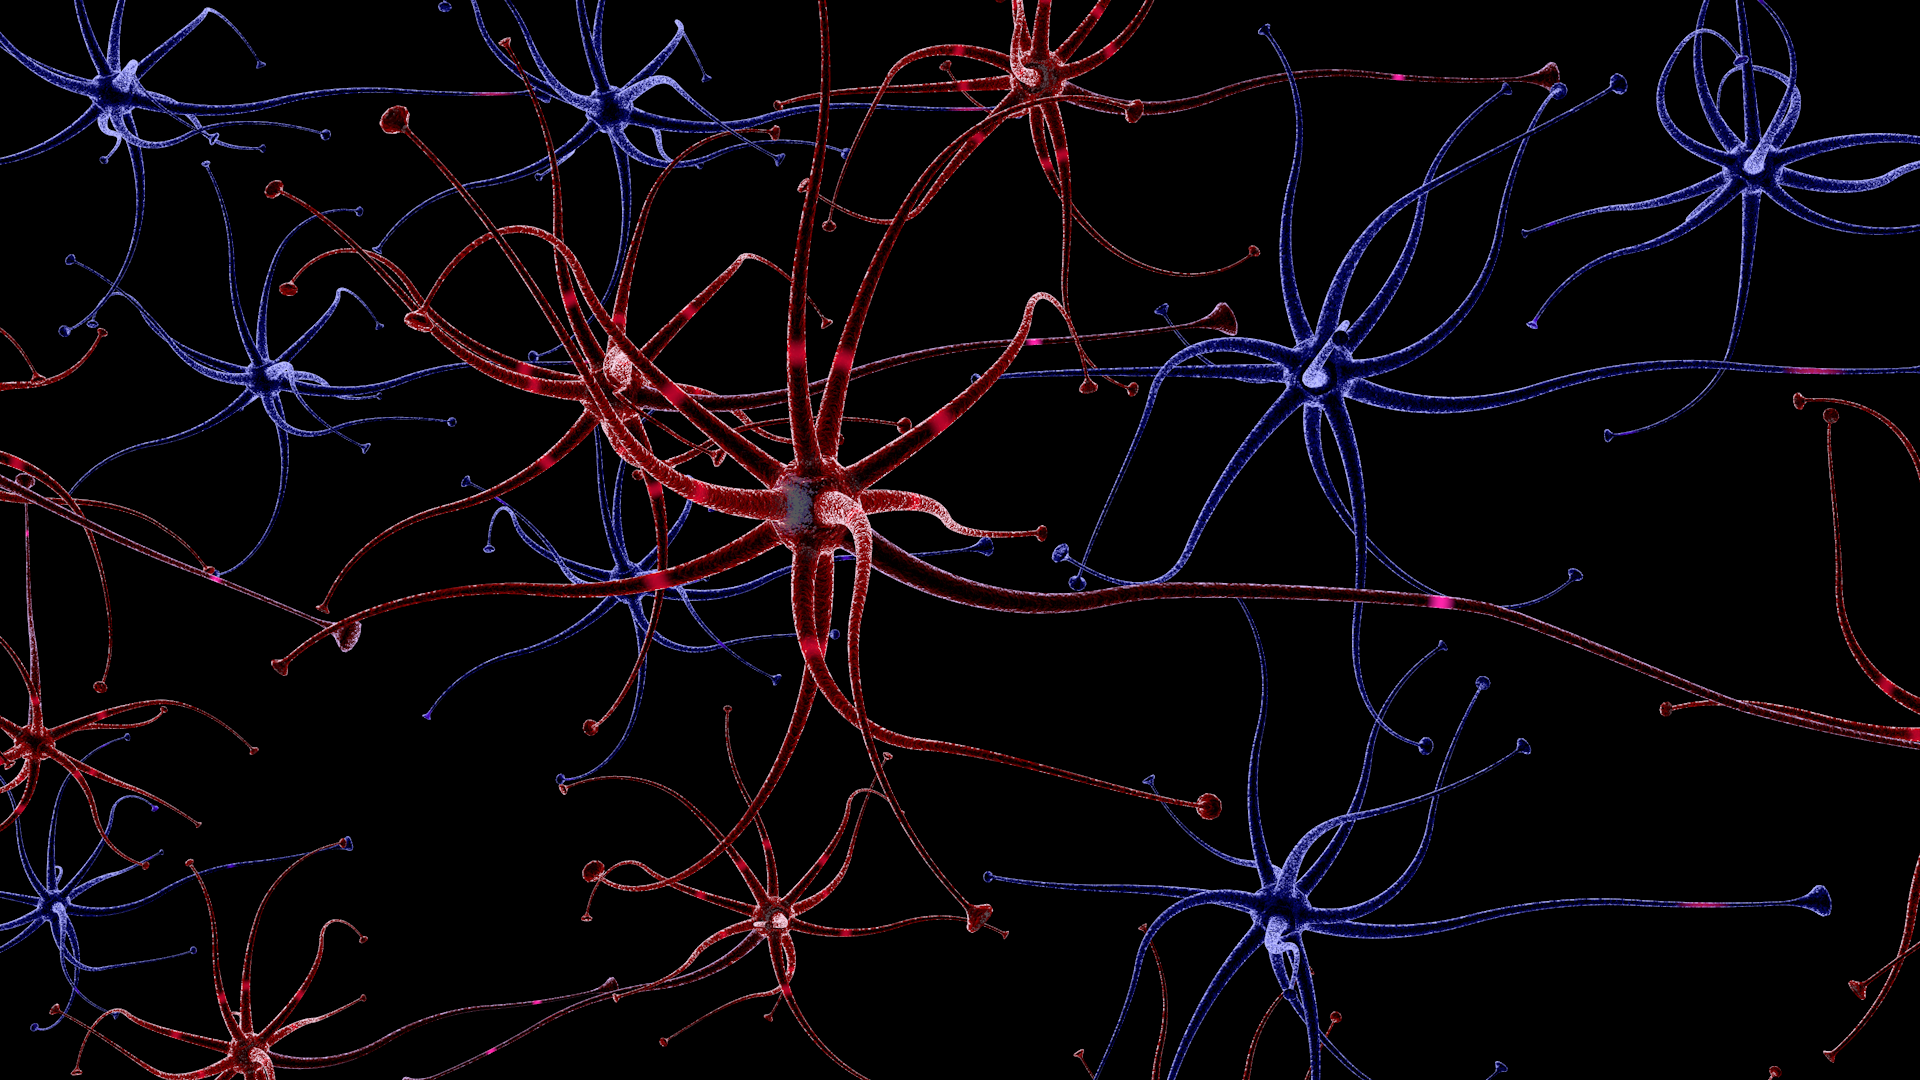 Brain Neurons Graphics in blue and red on a black background, Photo Credit: Wenrong He